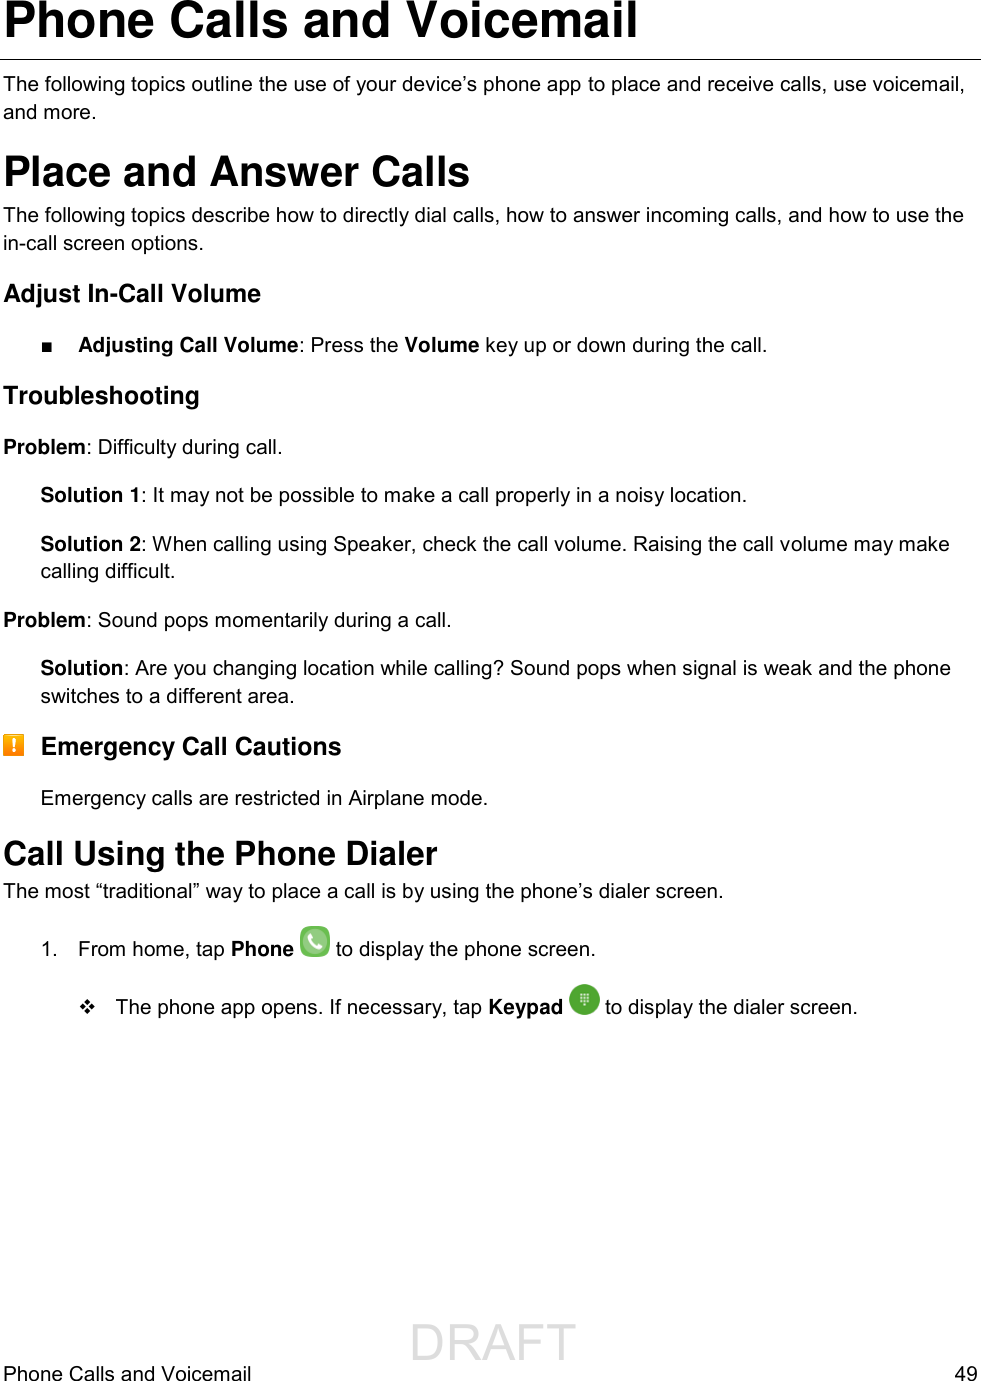                  DRAFT FOR INTERNAL USE ONLYPhone Calls and Voicemail  49 Phone Calls and Voicemail The following topics outline the use of your device’s phone app to place and receive calls, use voicemail, and more. Place and Answer Calls The following topics describe how to directly dial calls, how to answer incoming calls, and how to use the in-call screen options. Adjust In-Call Volume ■ Adjusting Call Volume: Press the Volume key up or down during the call. Troubleshooting Problem: Difficulty during call. Solution 1: It may not be possible to make a call properly in a noisy location. Solution 2: When calling using Speaker, check the call volume. Raising the call volume may make calling difficult. Problem: Sound pops momentarily during a call. Solution: Are you changing location while calling? Sound pops when signal is weak and the phone switches to a different area.  Emergency Call Cautions Emergency calls are restricted in Airplane mode. Call Using the Phone Dialer The most “traditional” way to place a call is by using the phone’s dialer screen.  1.  From home, tap Phone   to display the phone screen.   The phone app opens. If necessary, tap Keypad   to display the dialer screen.  